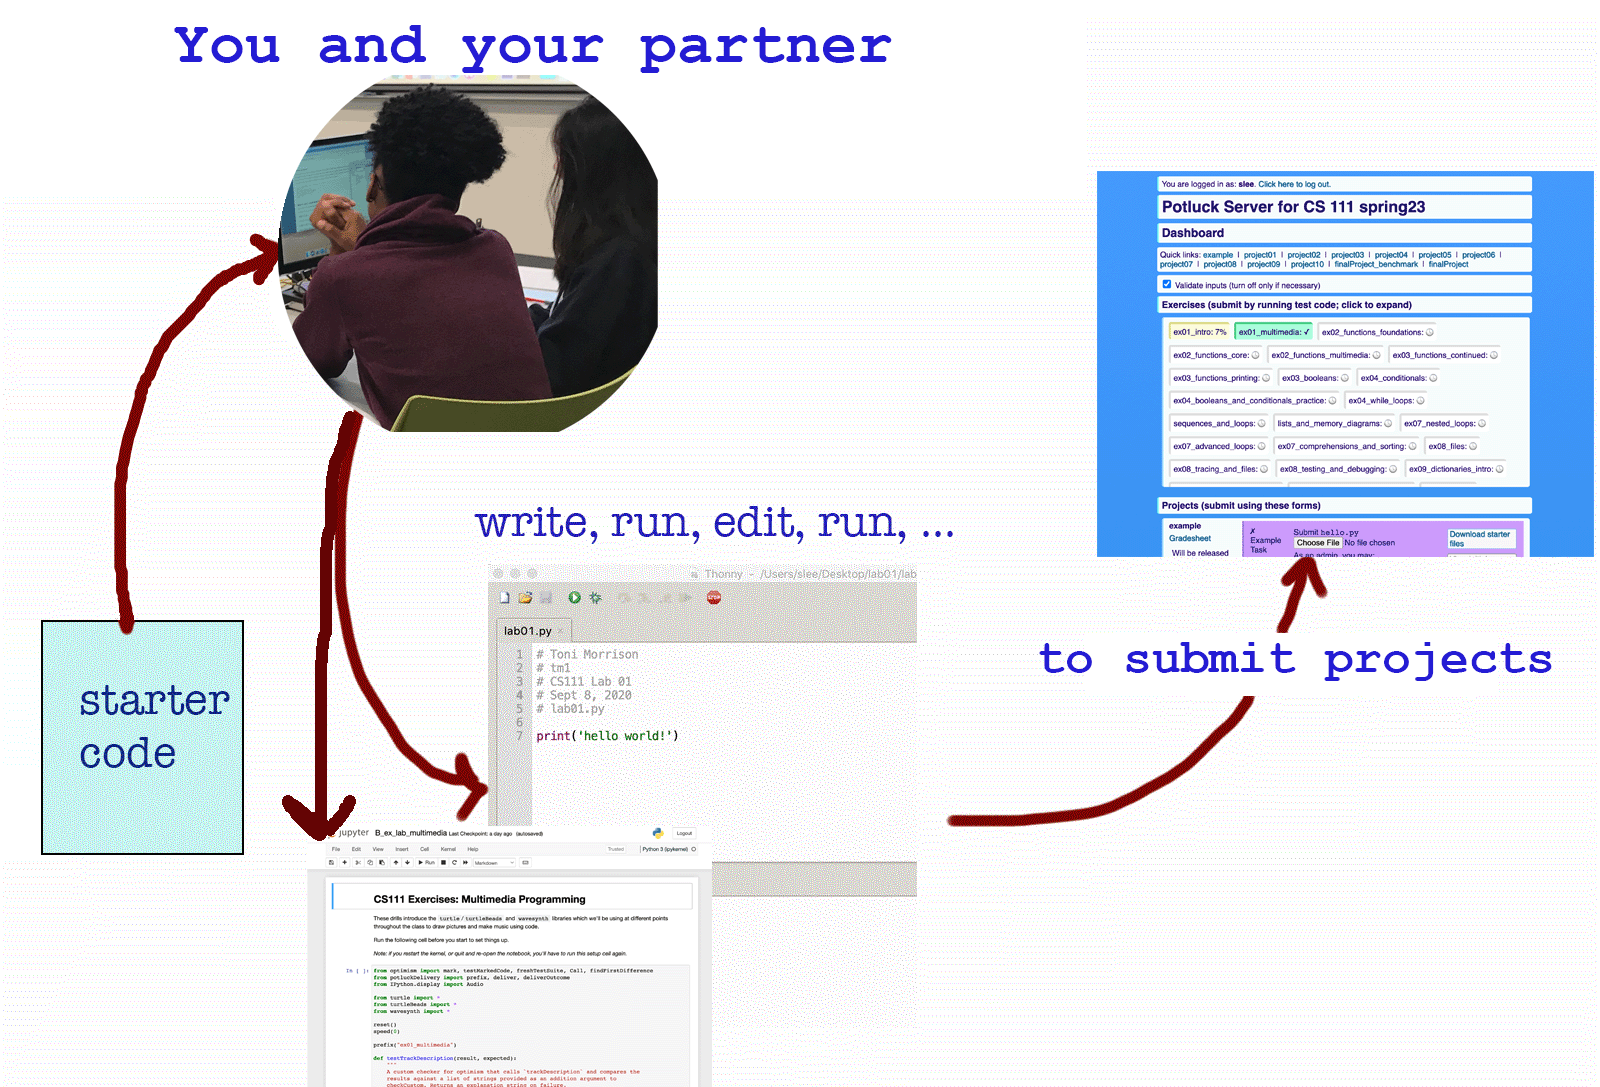 A graphic showing a high level overview of today's lab: getting the starter code, writing code in Thonny, and then, when working on a project, uploading files to the submission server